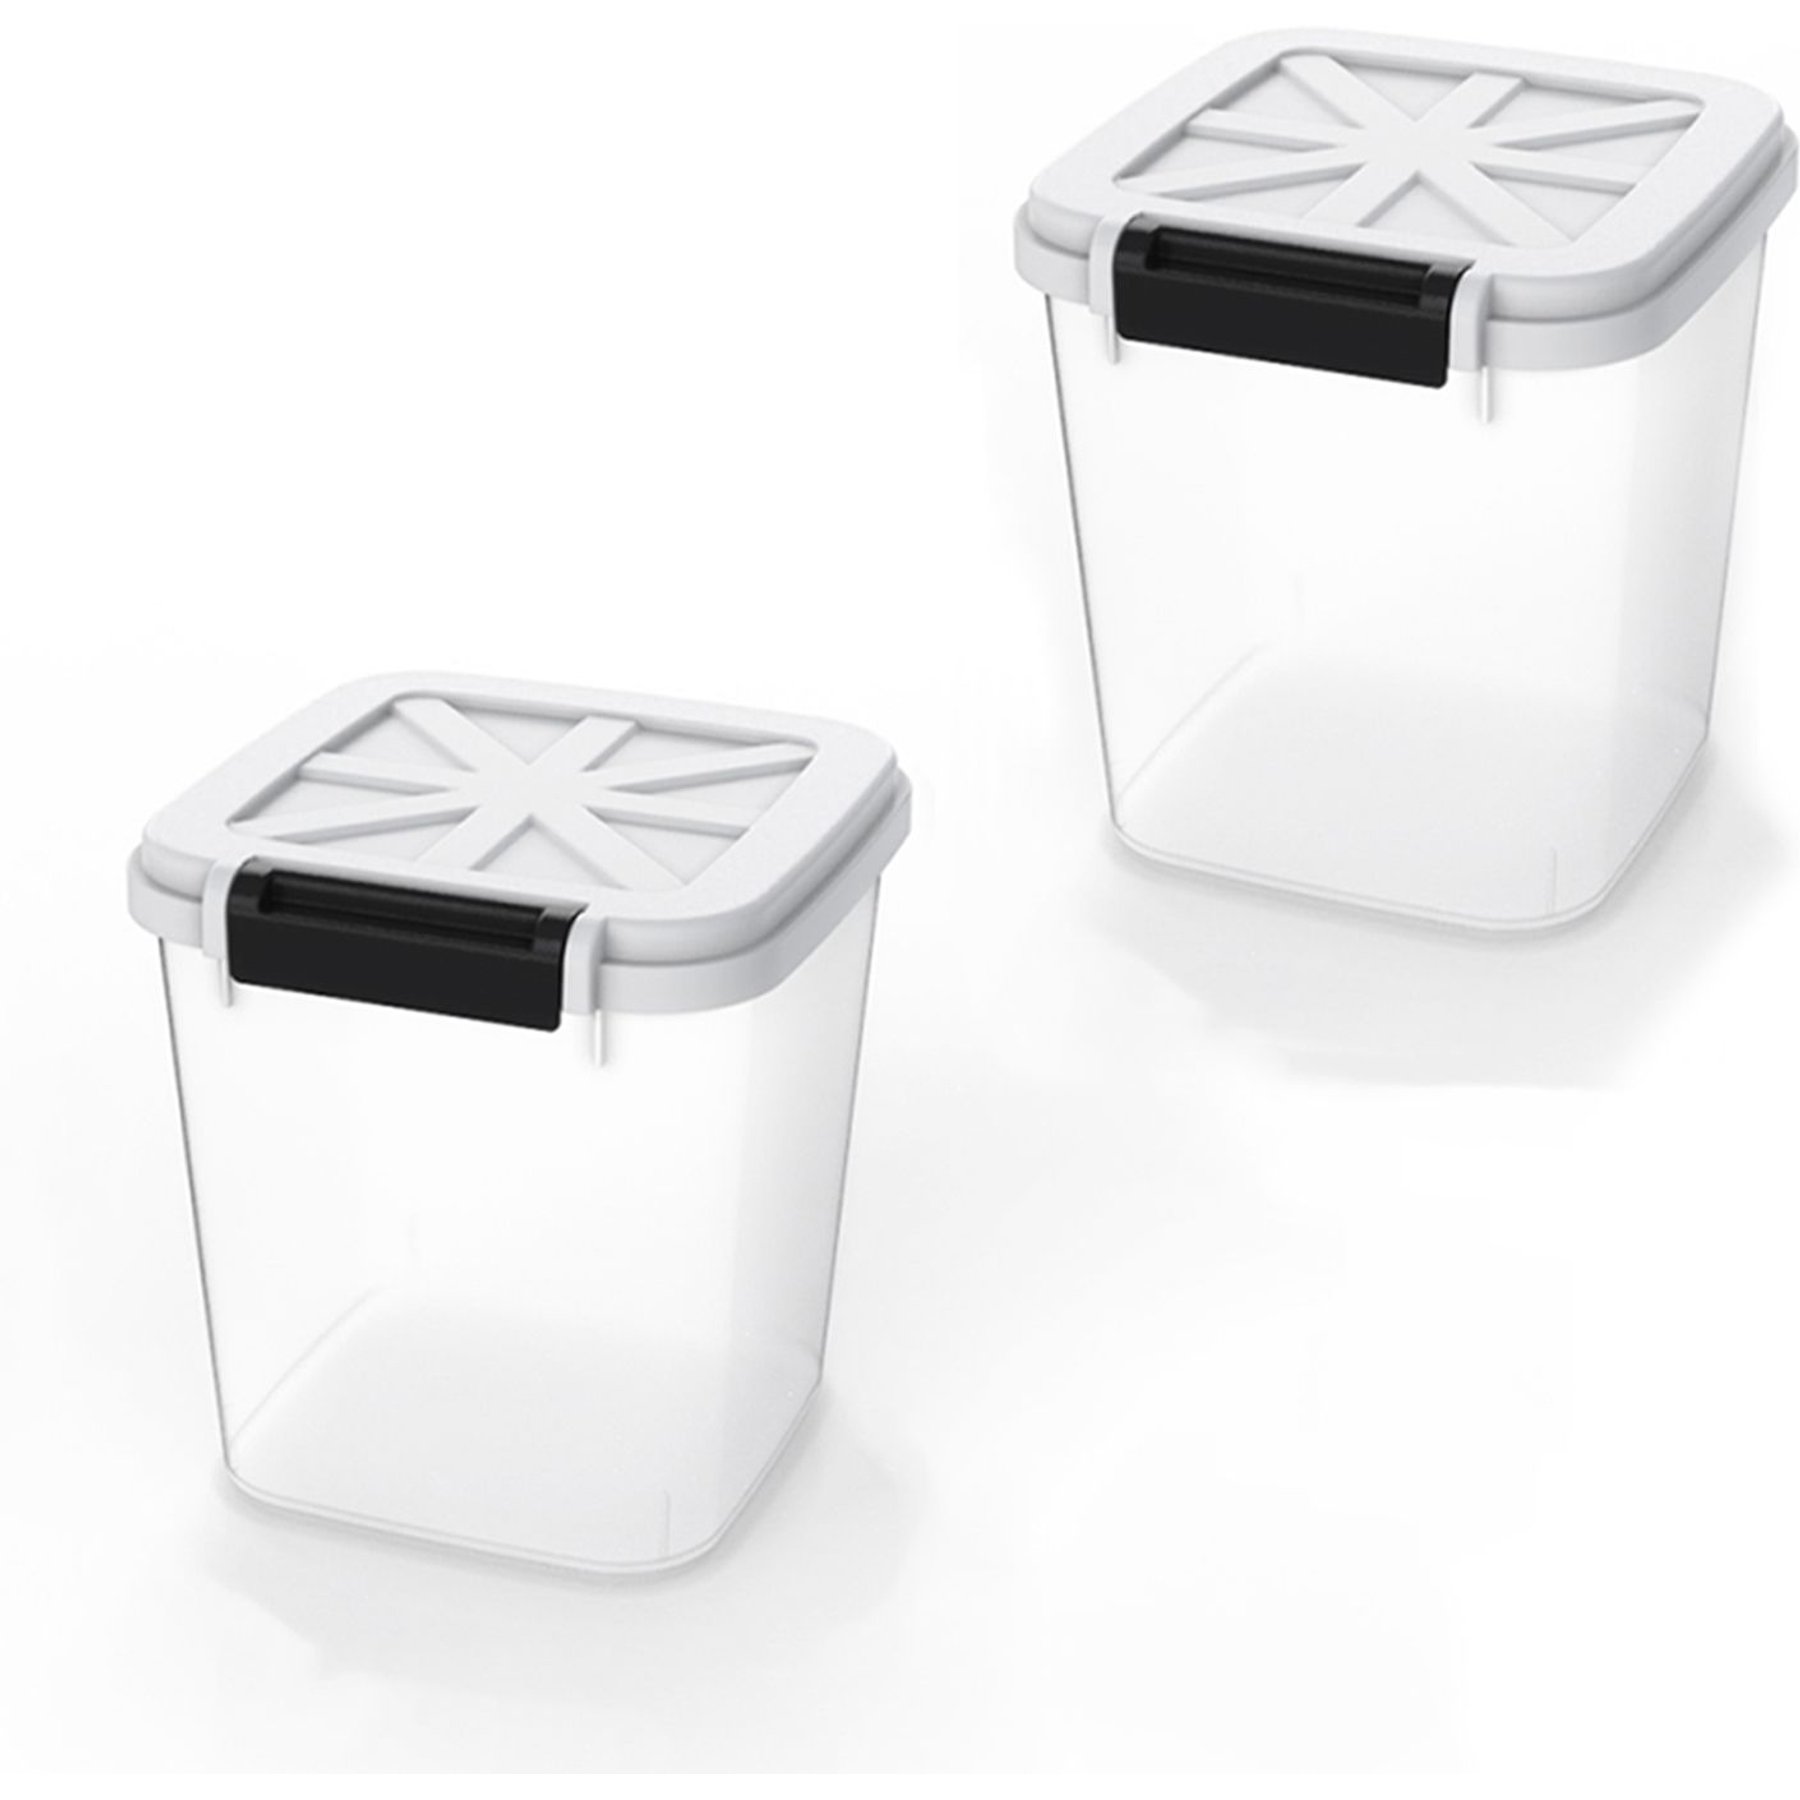 HANAMYA Rice Storage Container with Measuring Cup - 30 lb - White & Gray - 2 Piece